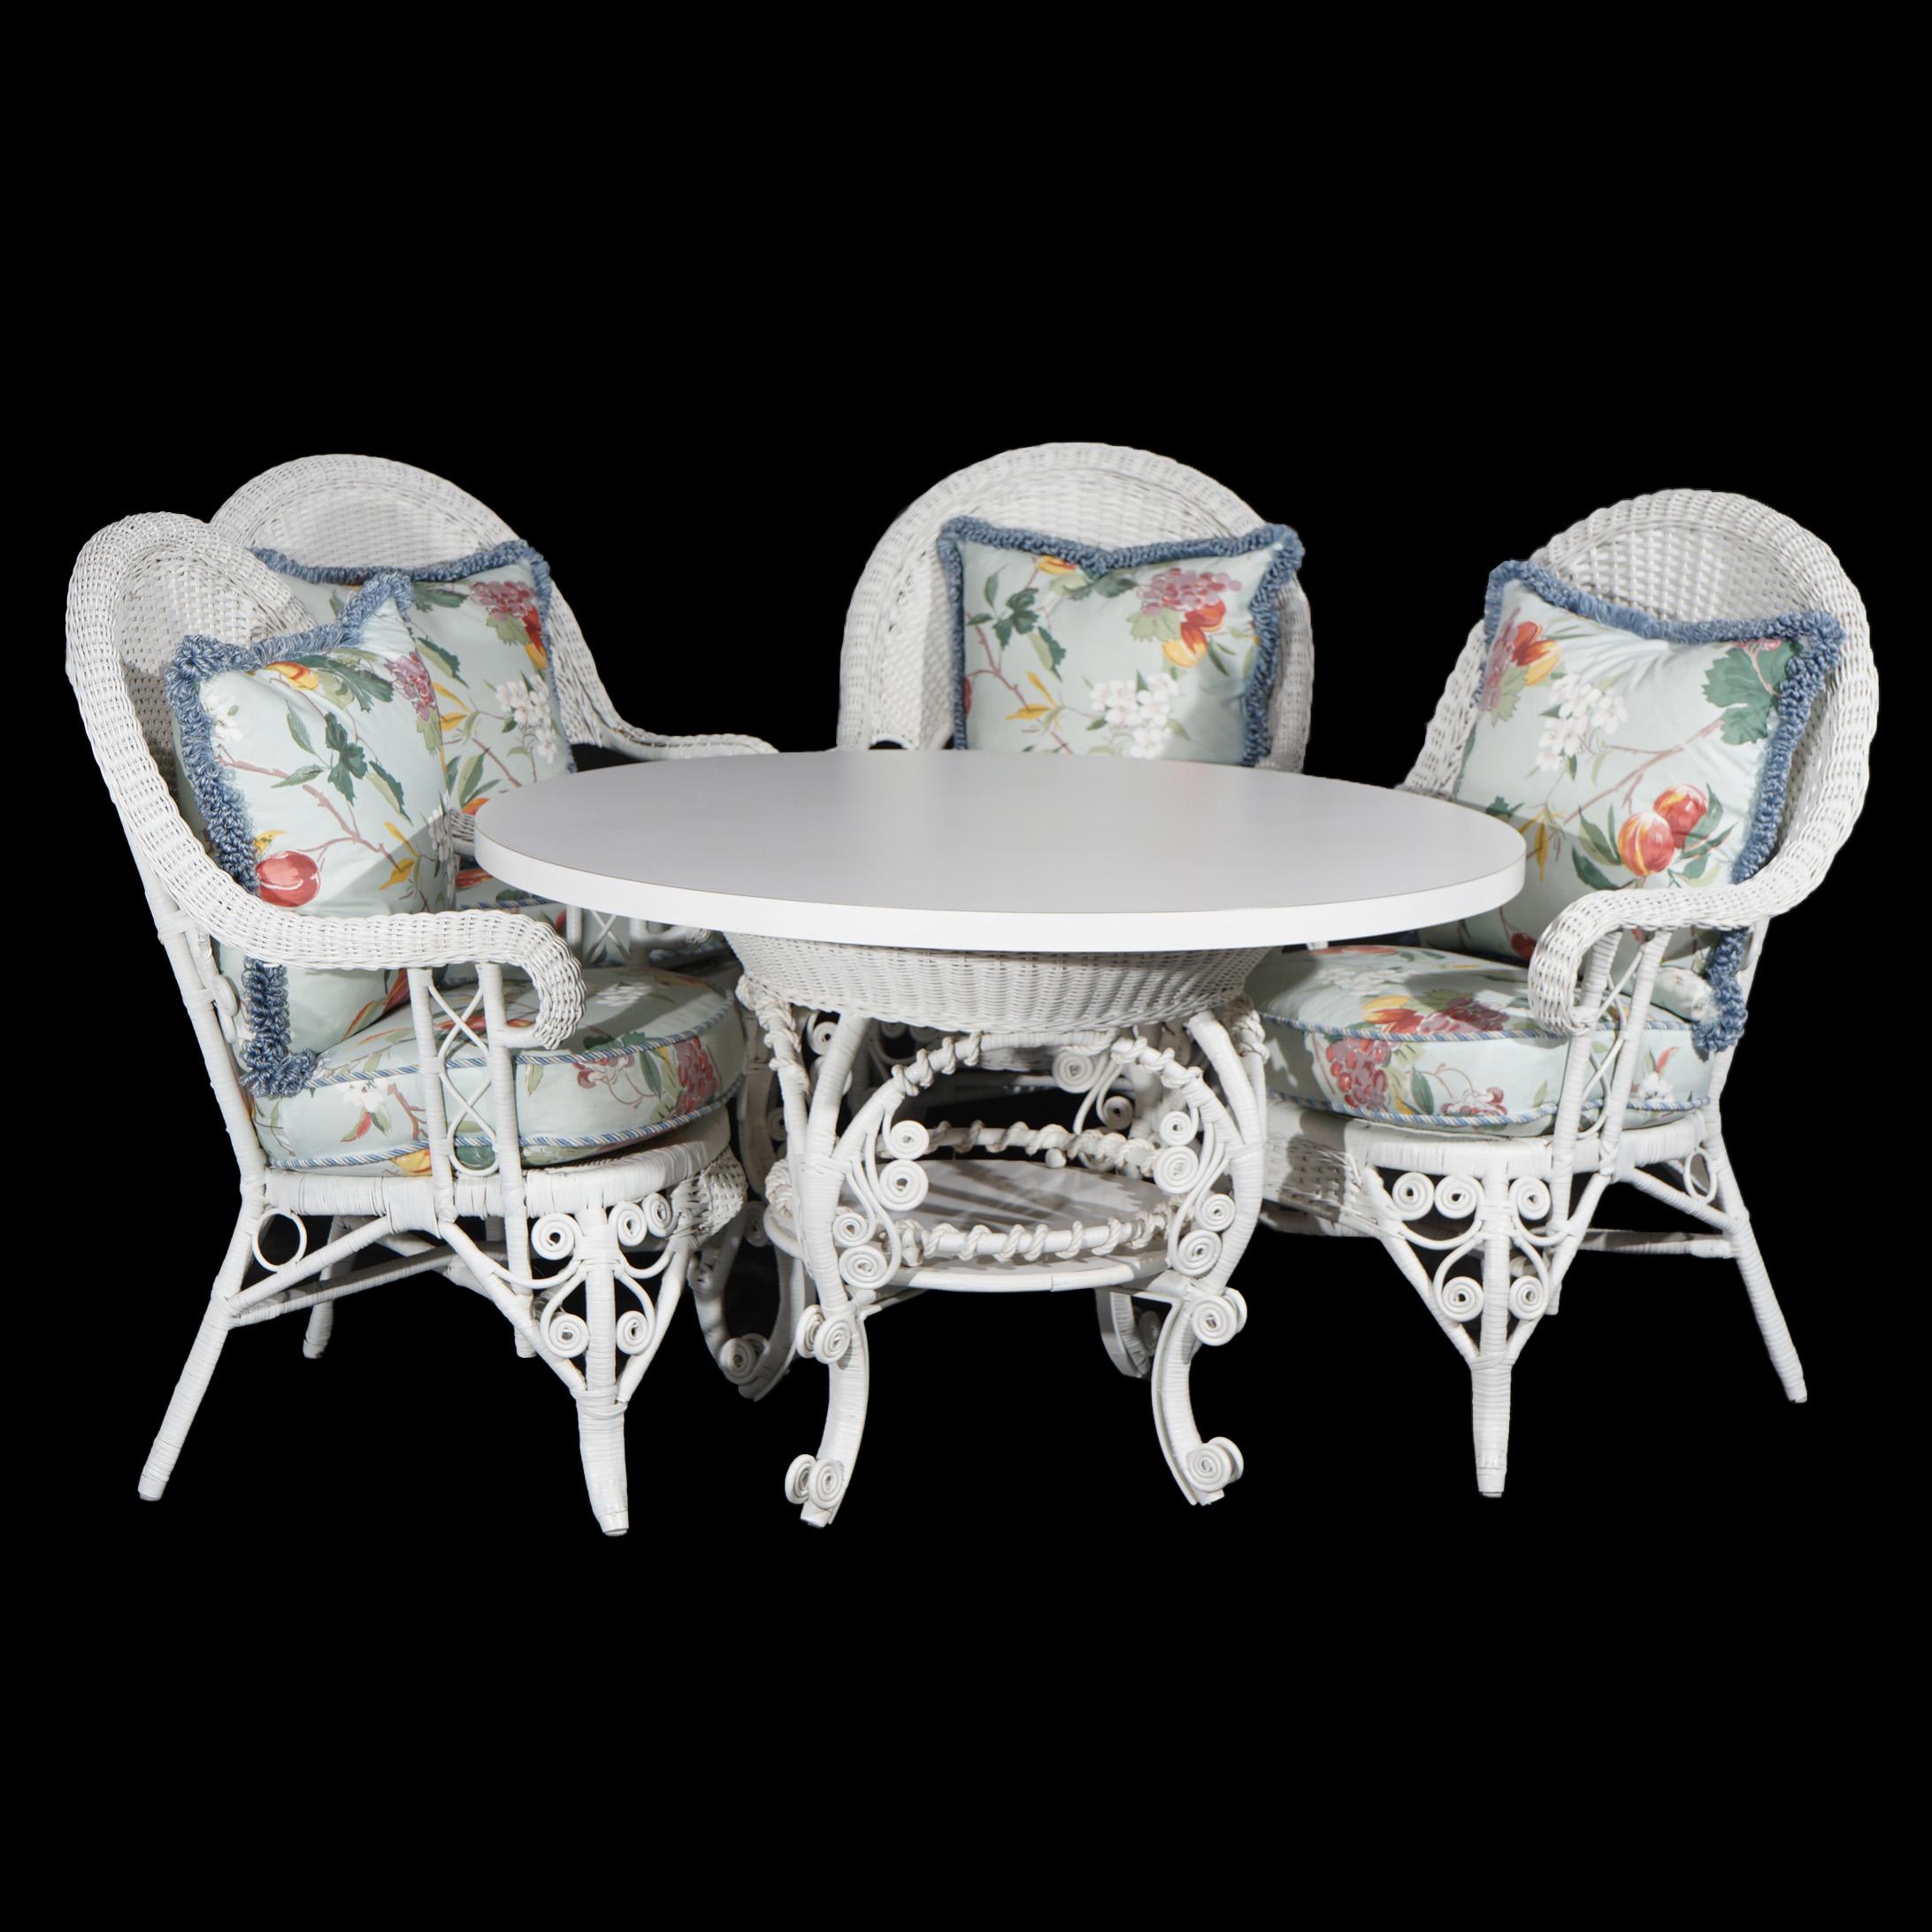 ***Ask About Reduced In-House Shipping Rates - Reliable Service & Fully Insured***
Heywood Wakefield School Scrolled White Wicker Five-Piece Dining Set 20thC

Measures- Chairs: 44.5''H x 28.5''W x 27''D; 16'' SH without cushion, 21'' SH with